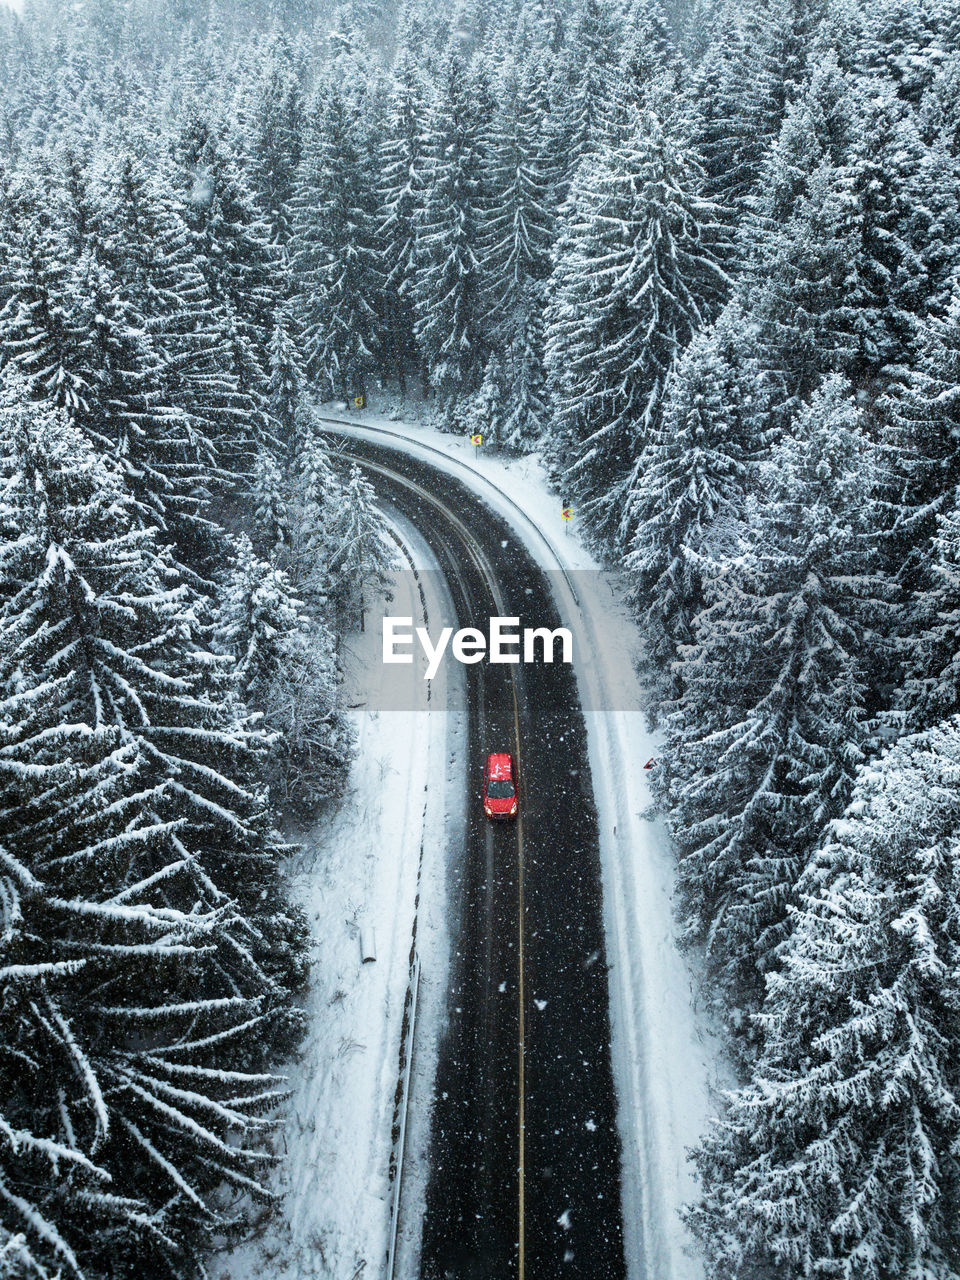 AERIAL VIEW OF SNOW COVERED LANDSCAPE